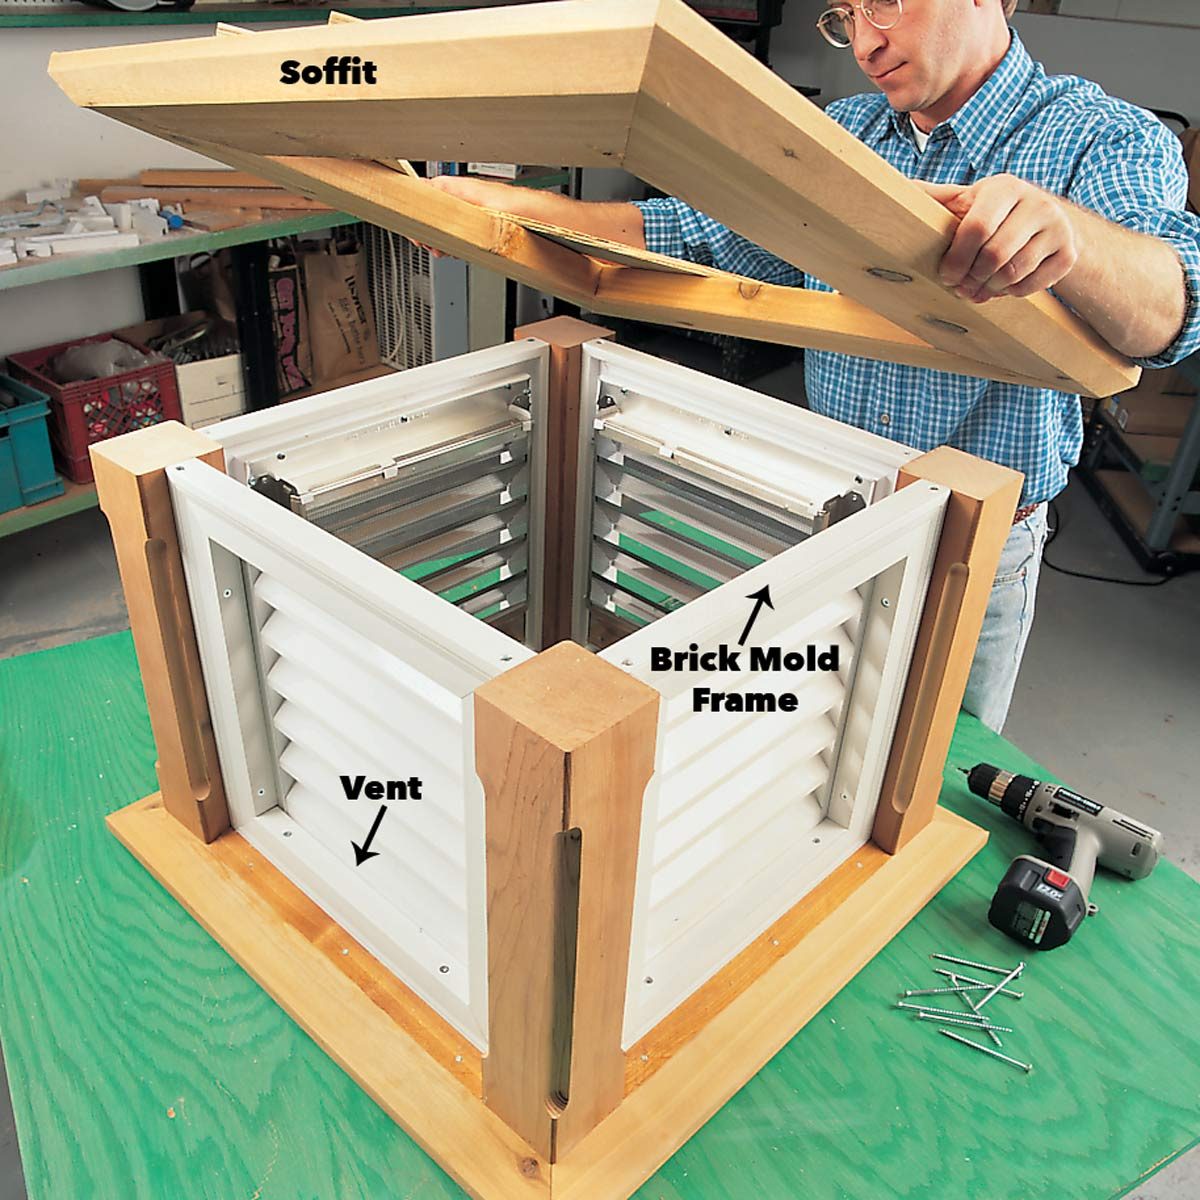 How to Build a Garage or Shed Cupola | Family Handyman